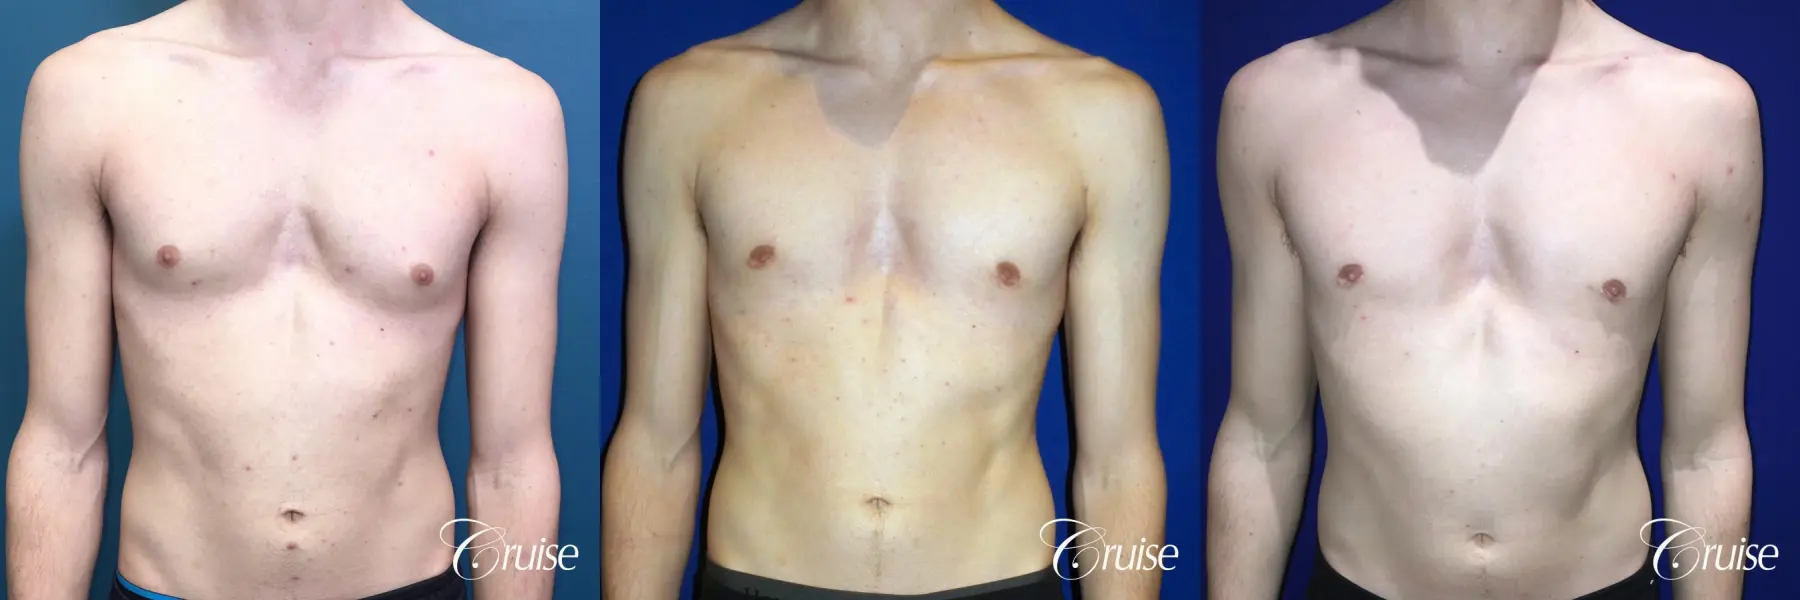 ALS - Body: Patient 1 - Before and After 1